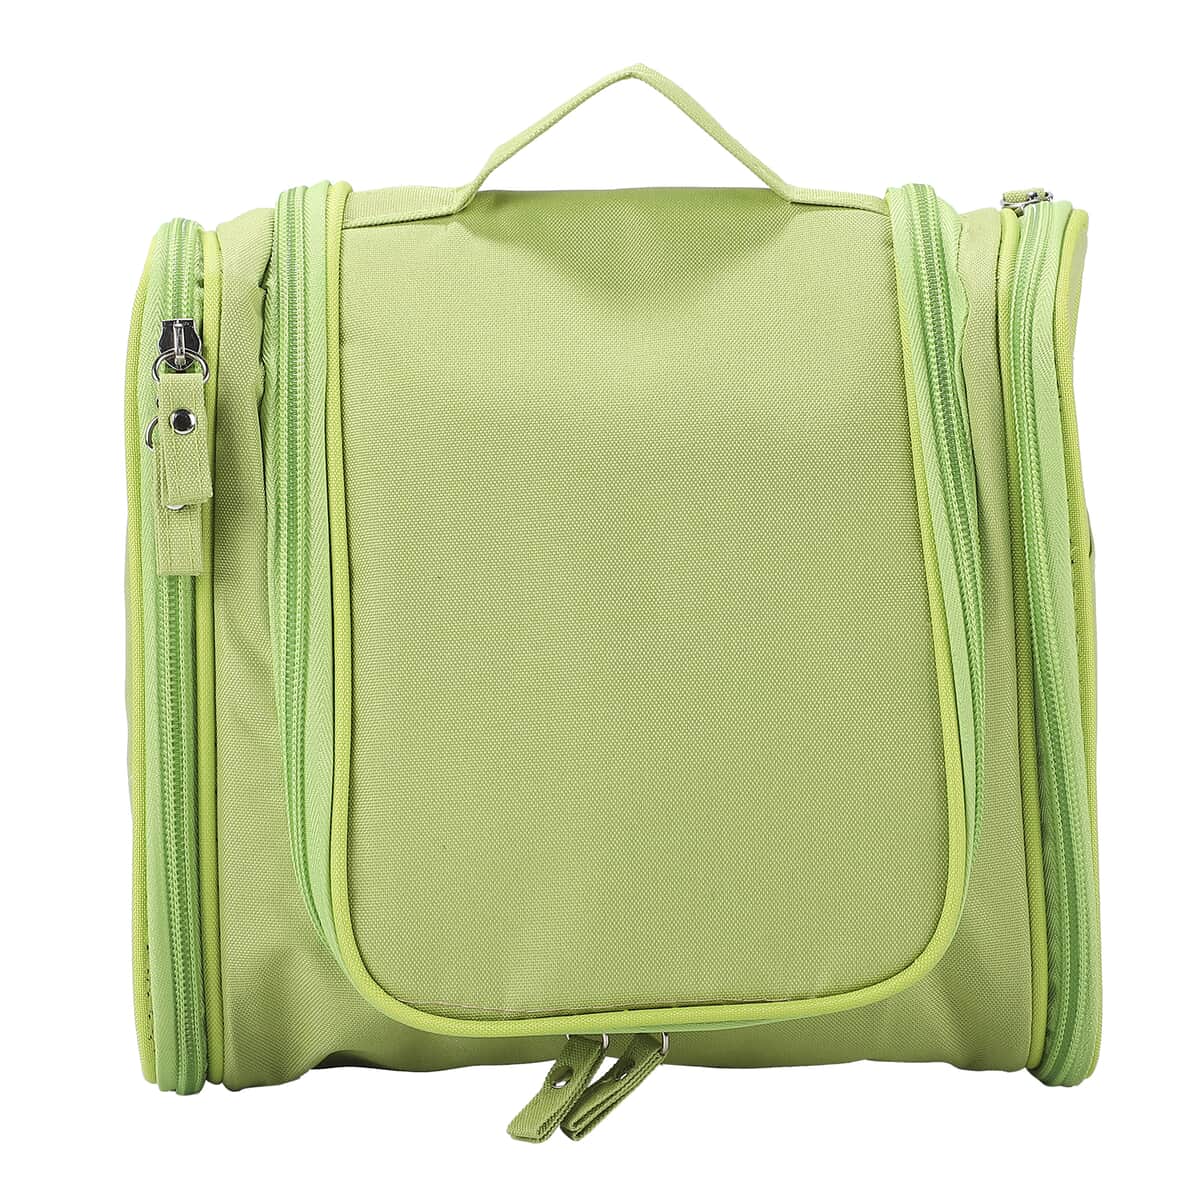 HOMESMART Green Travel Toiletry Bag (9.45"x9.84"x3.94") image number 0